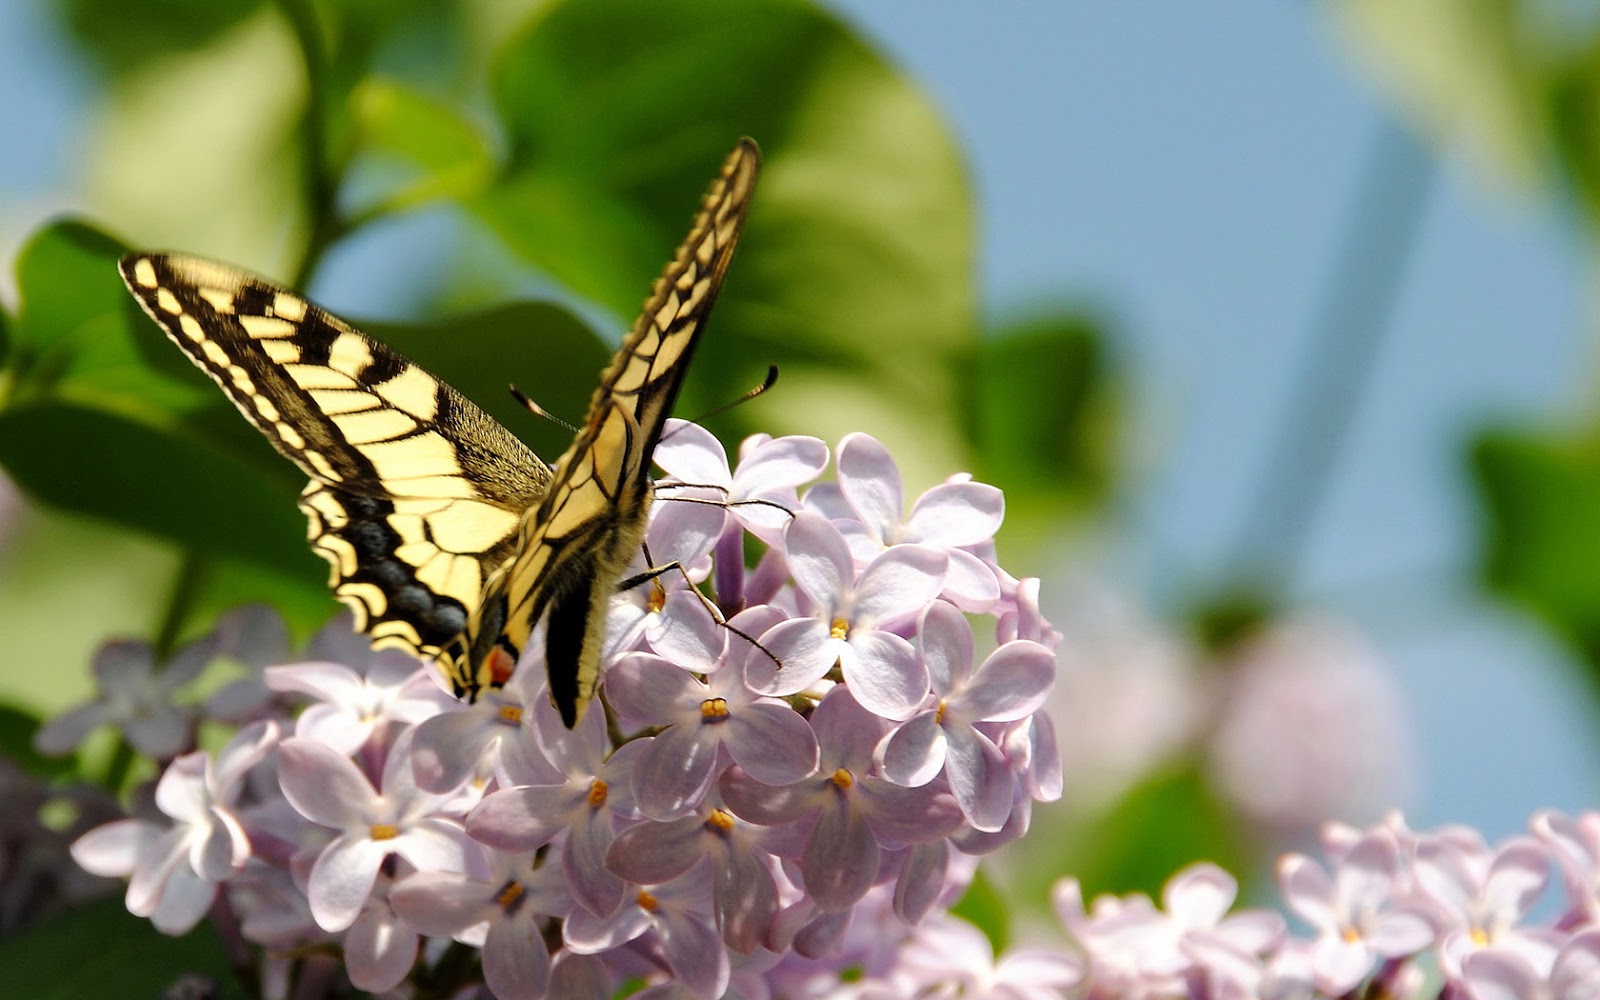 HD Wallpaper Spring With Yellow Butterfly Sitting On